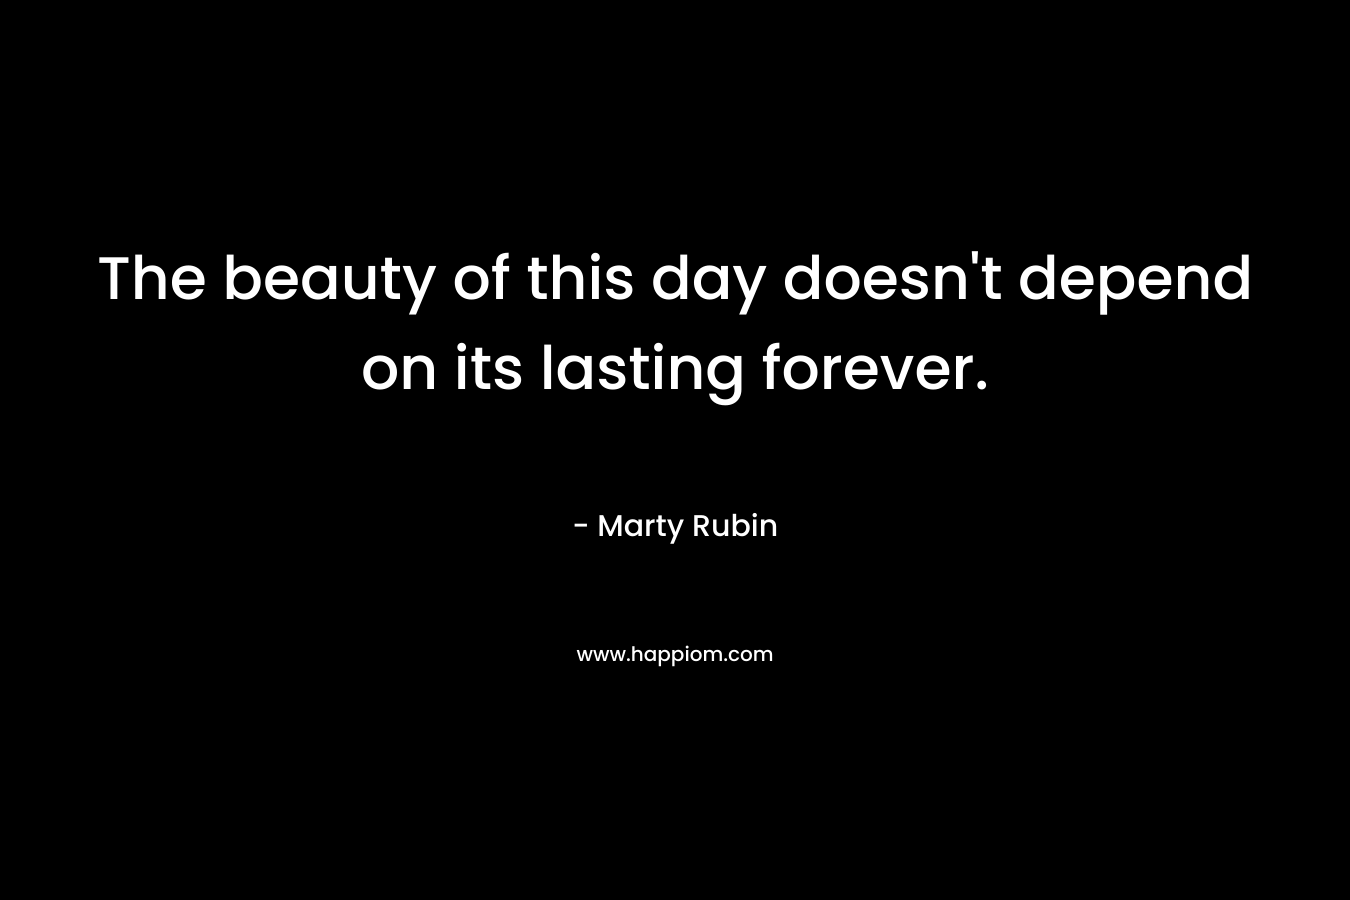 The beauty of this day doesn't depend on its lasting forever.